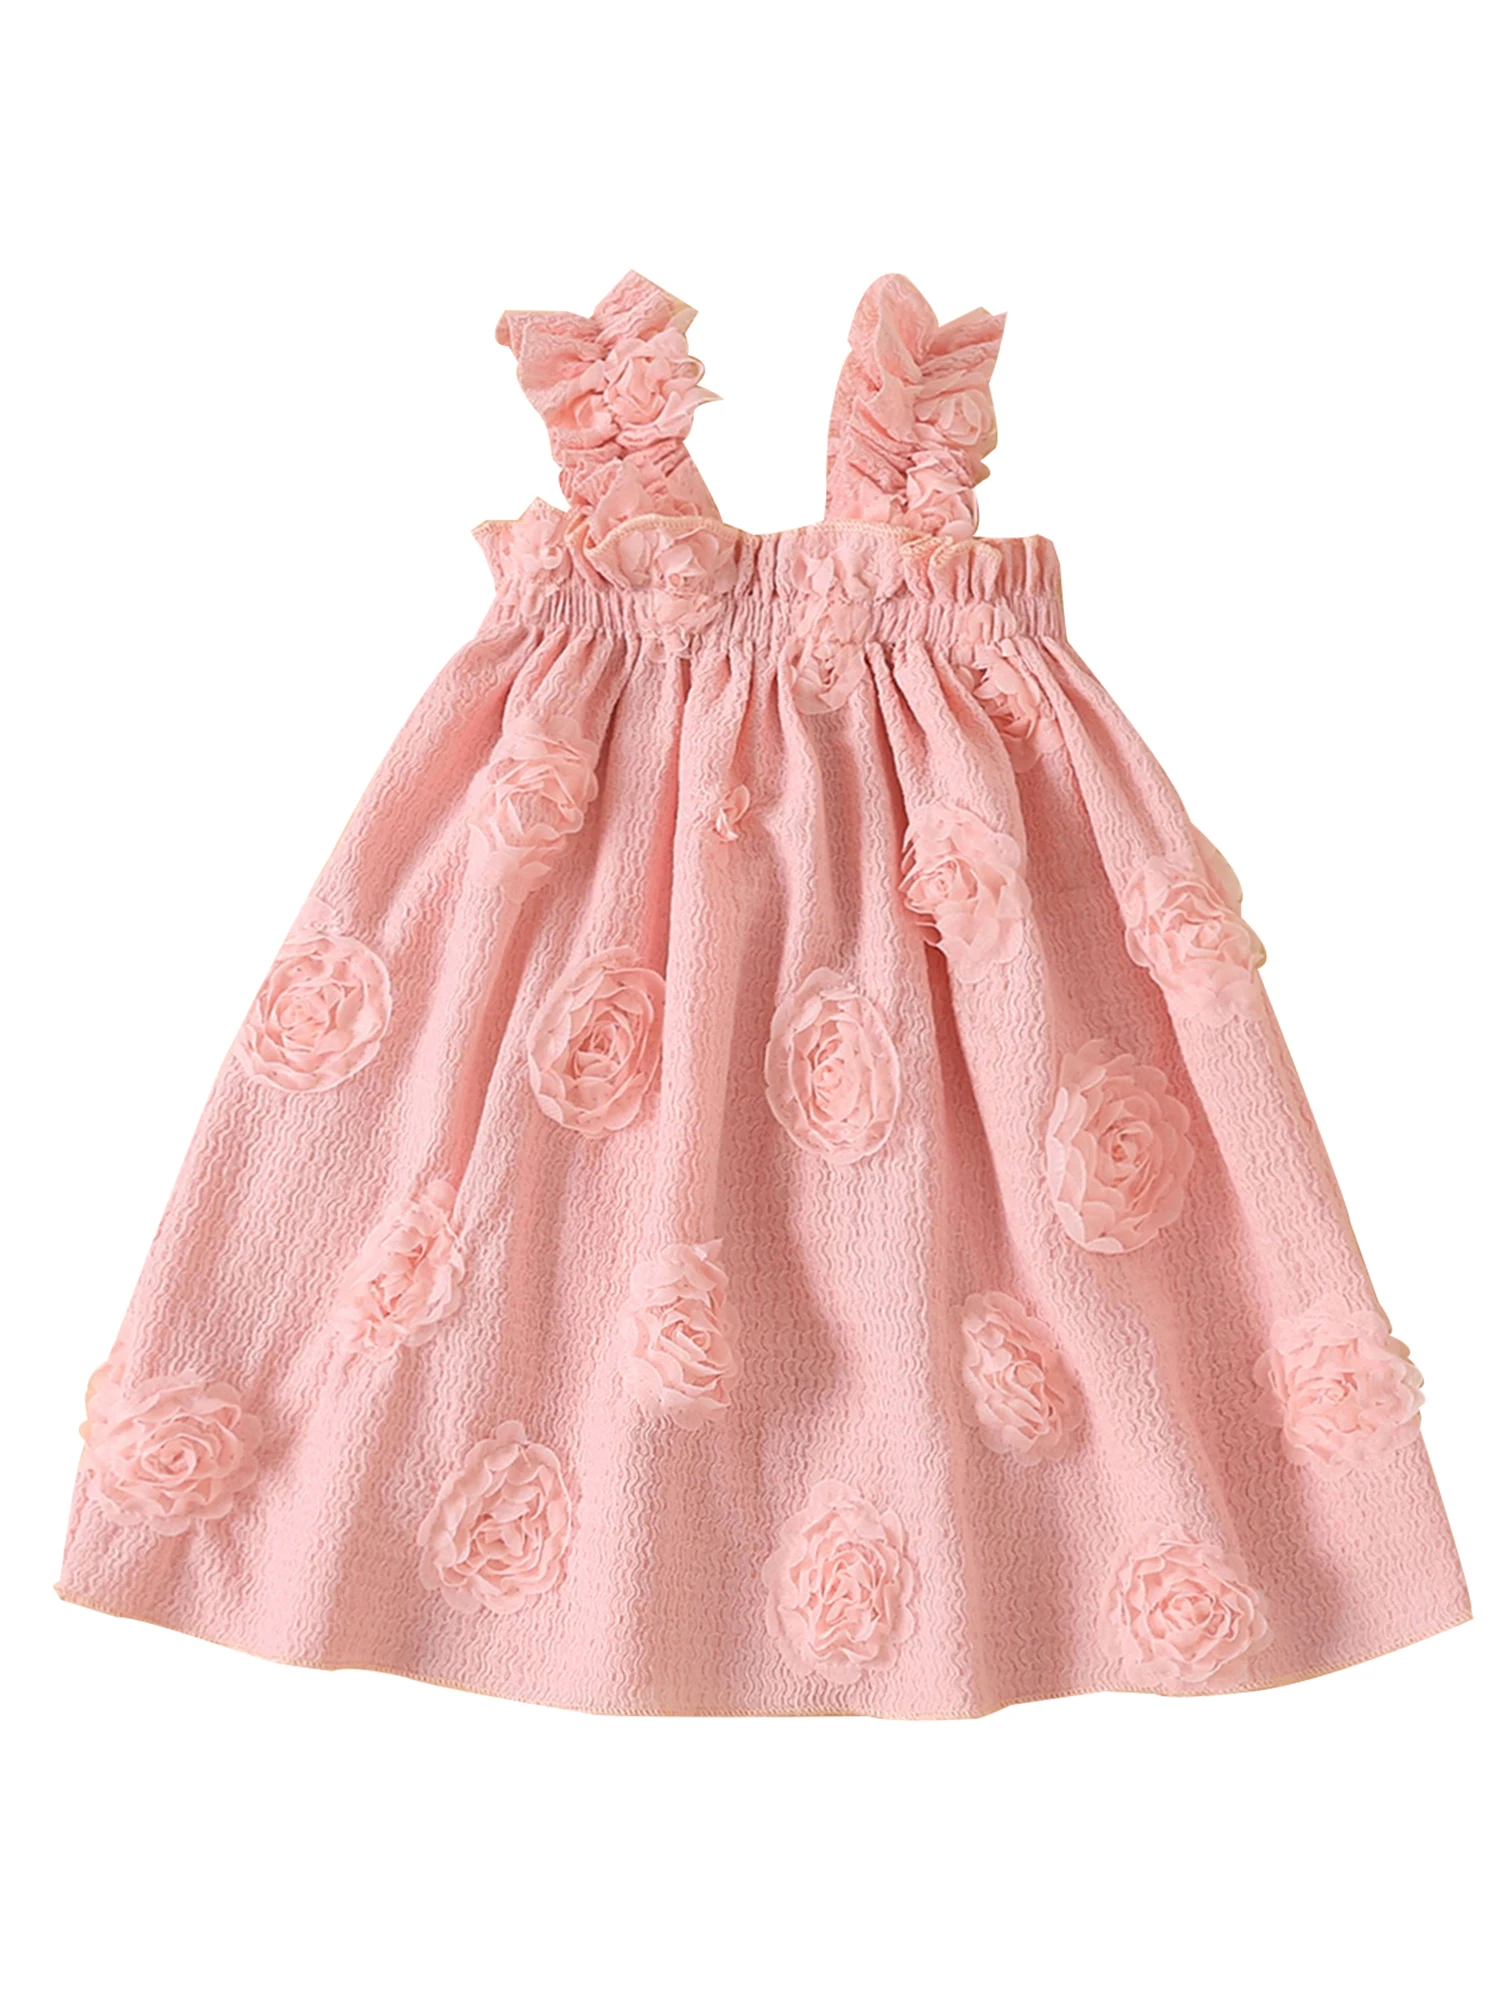 

Elegant Sleeveless Floral Lace Princess Dress with Bowknot for Baby Girls - Perfect for Pageants Weddings Birthdays and